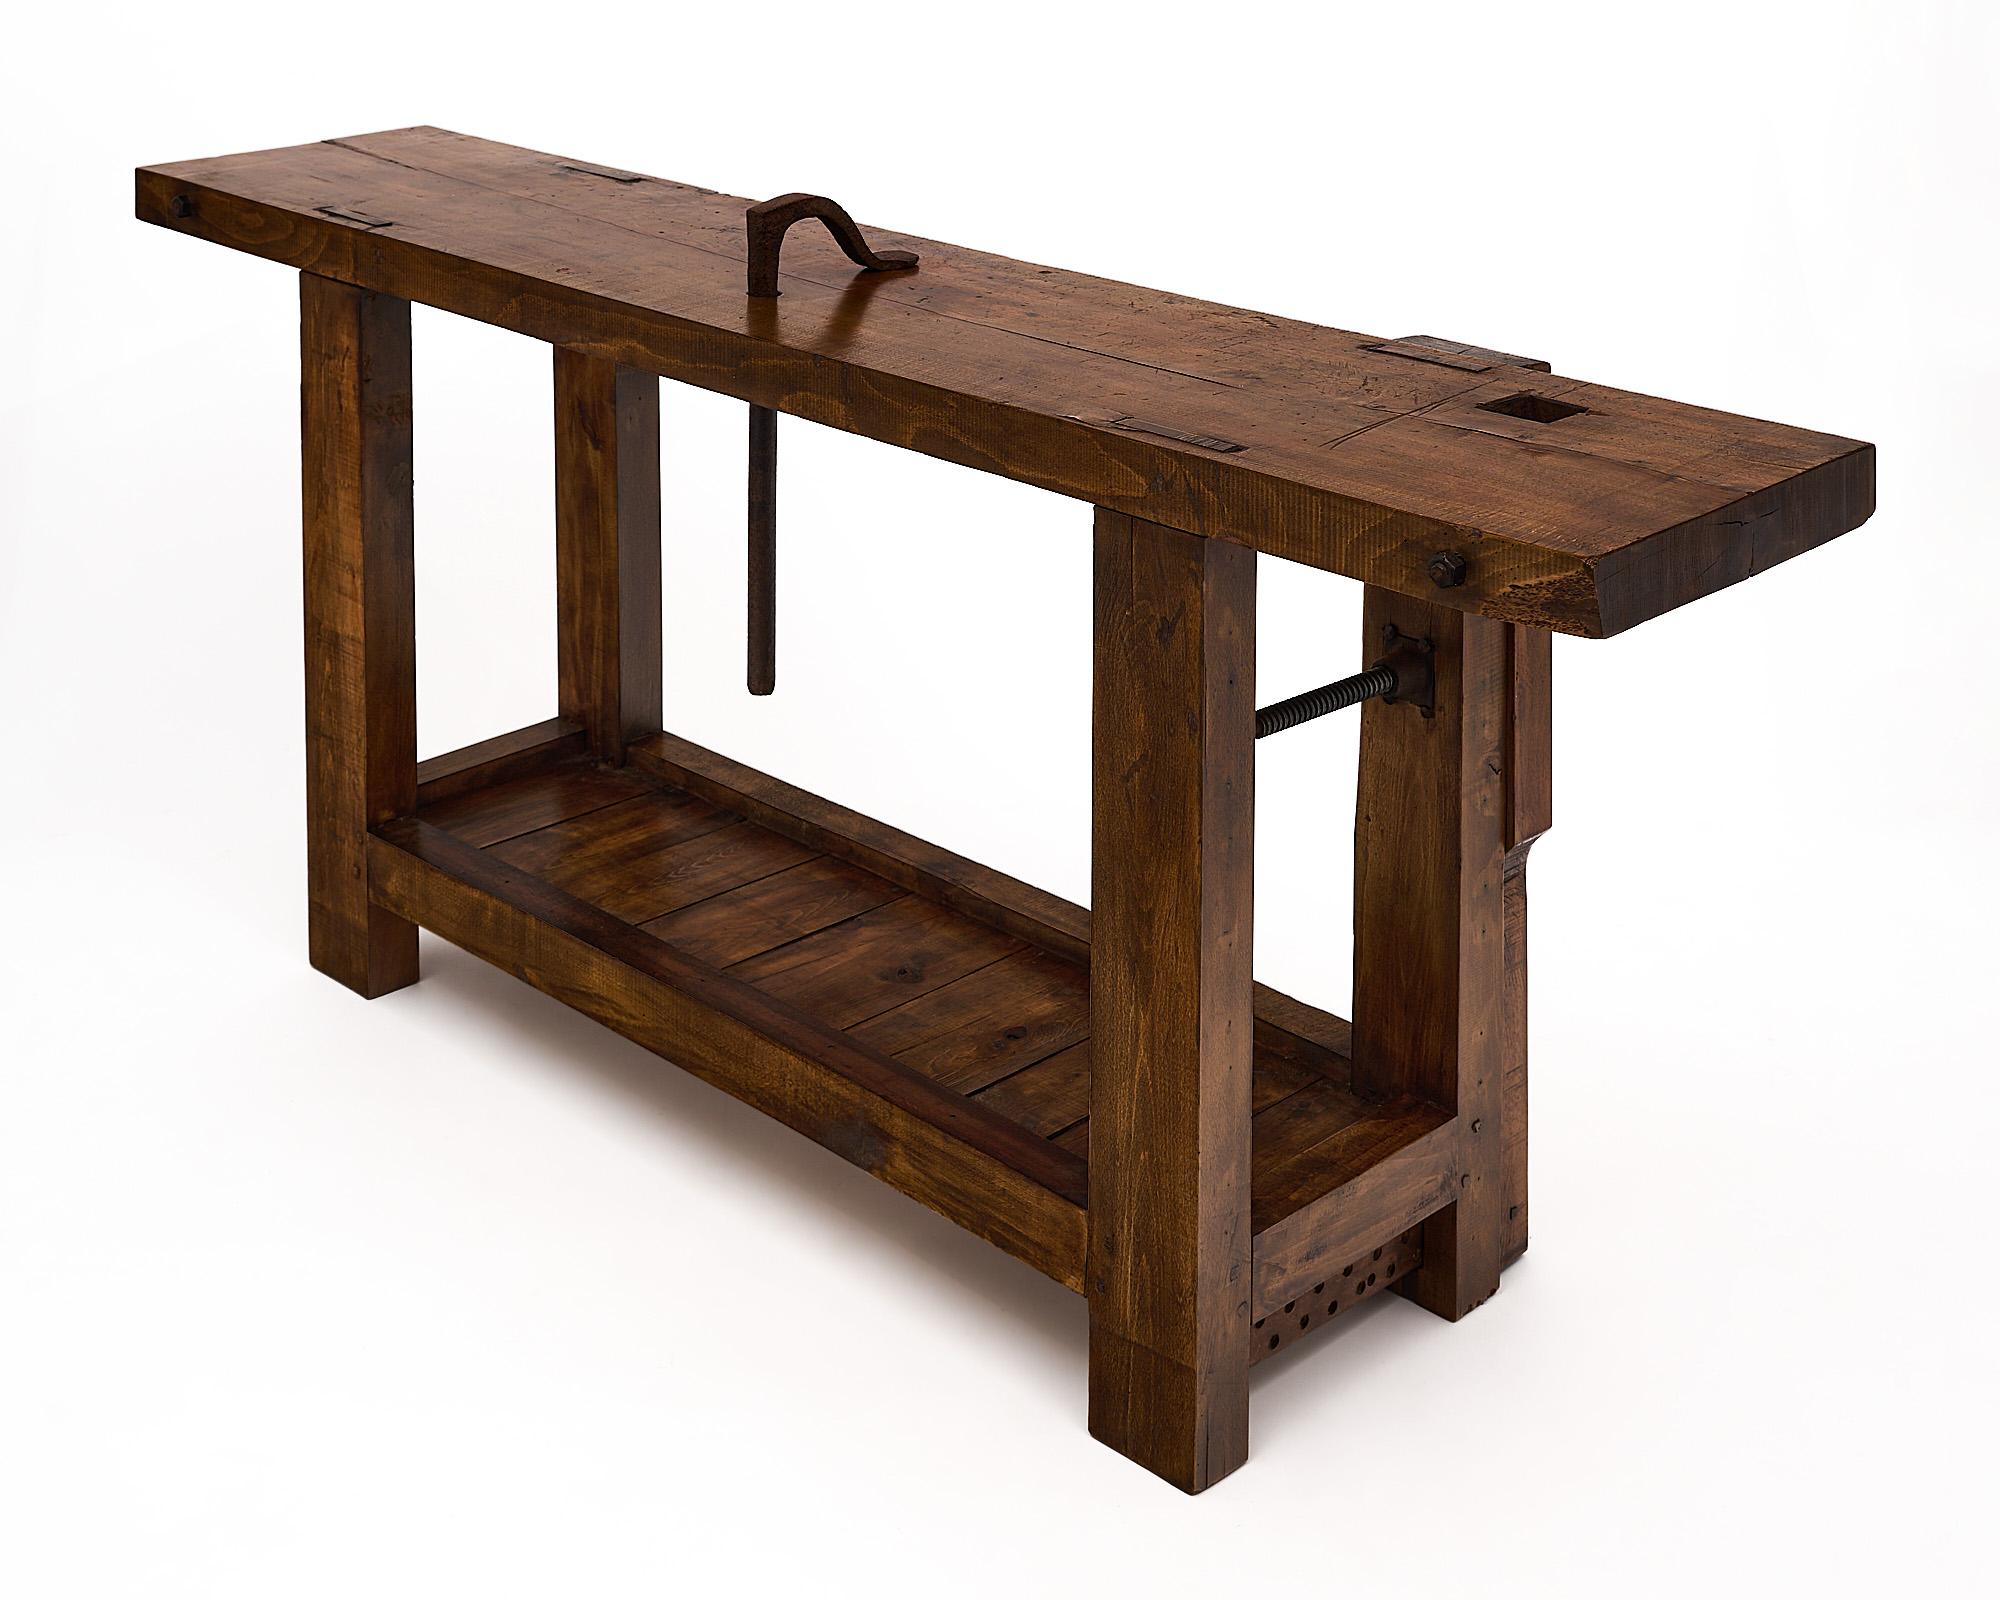 Workbench, French, made of beech wood. This was the essential wood in the craftsmen shops all throughout the 19th century. This console piece features the original vise, a forged iron clamp, and a bottom shelf. The depth of the table top is 15.5”.